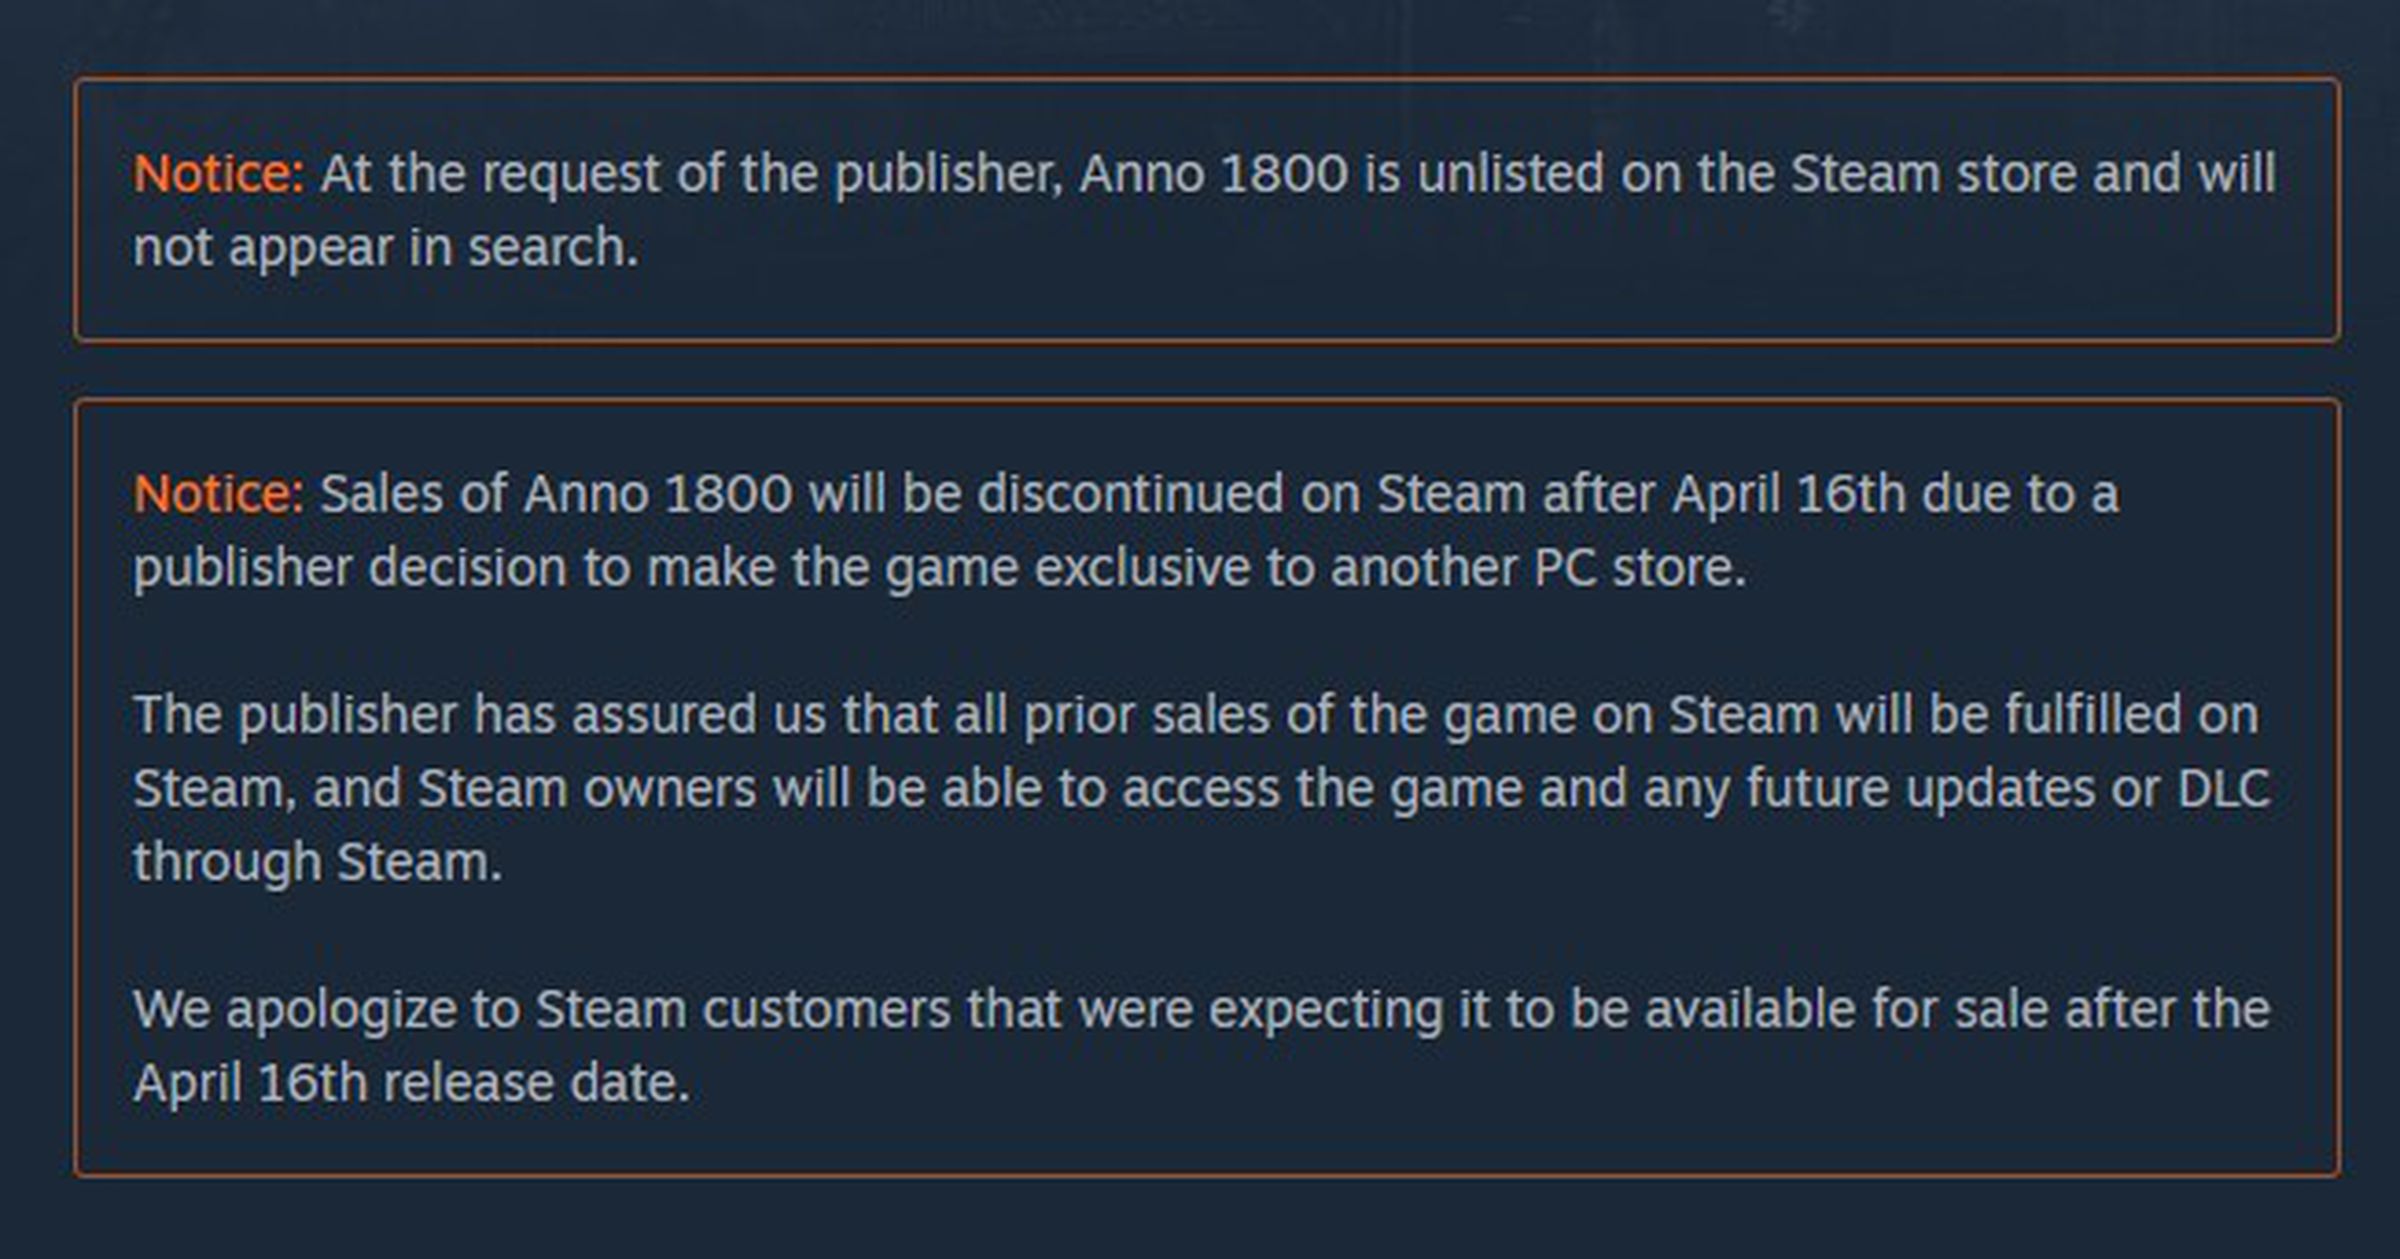 “Notice: Sales of Anno 1800 will be discontinued on Steam after April 16th due to a publisher decision to make the game exclusive to another PC store.”